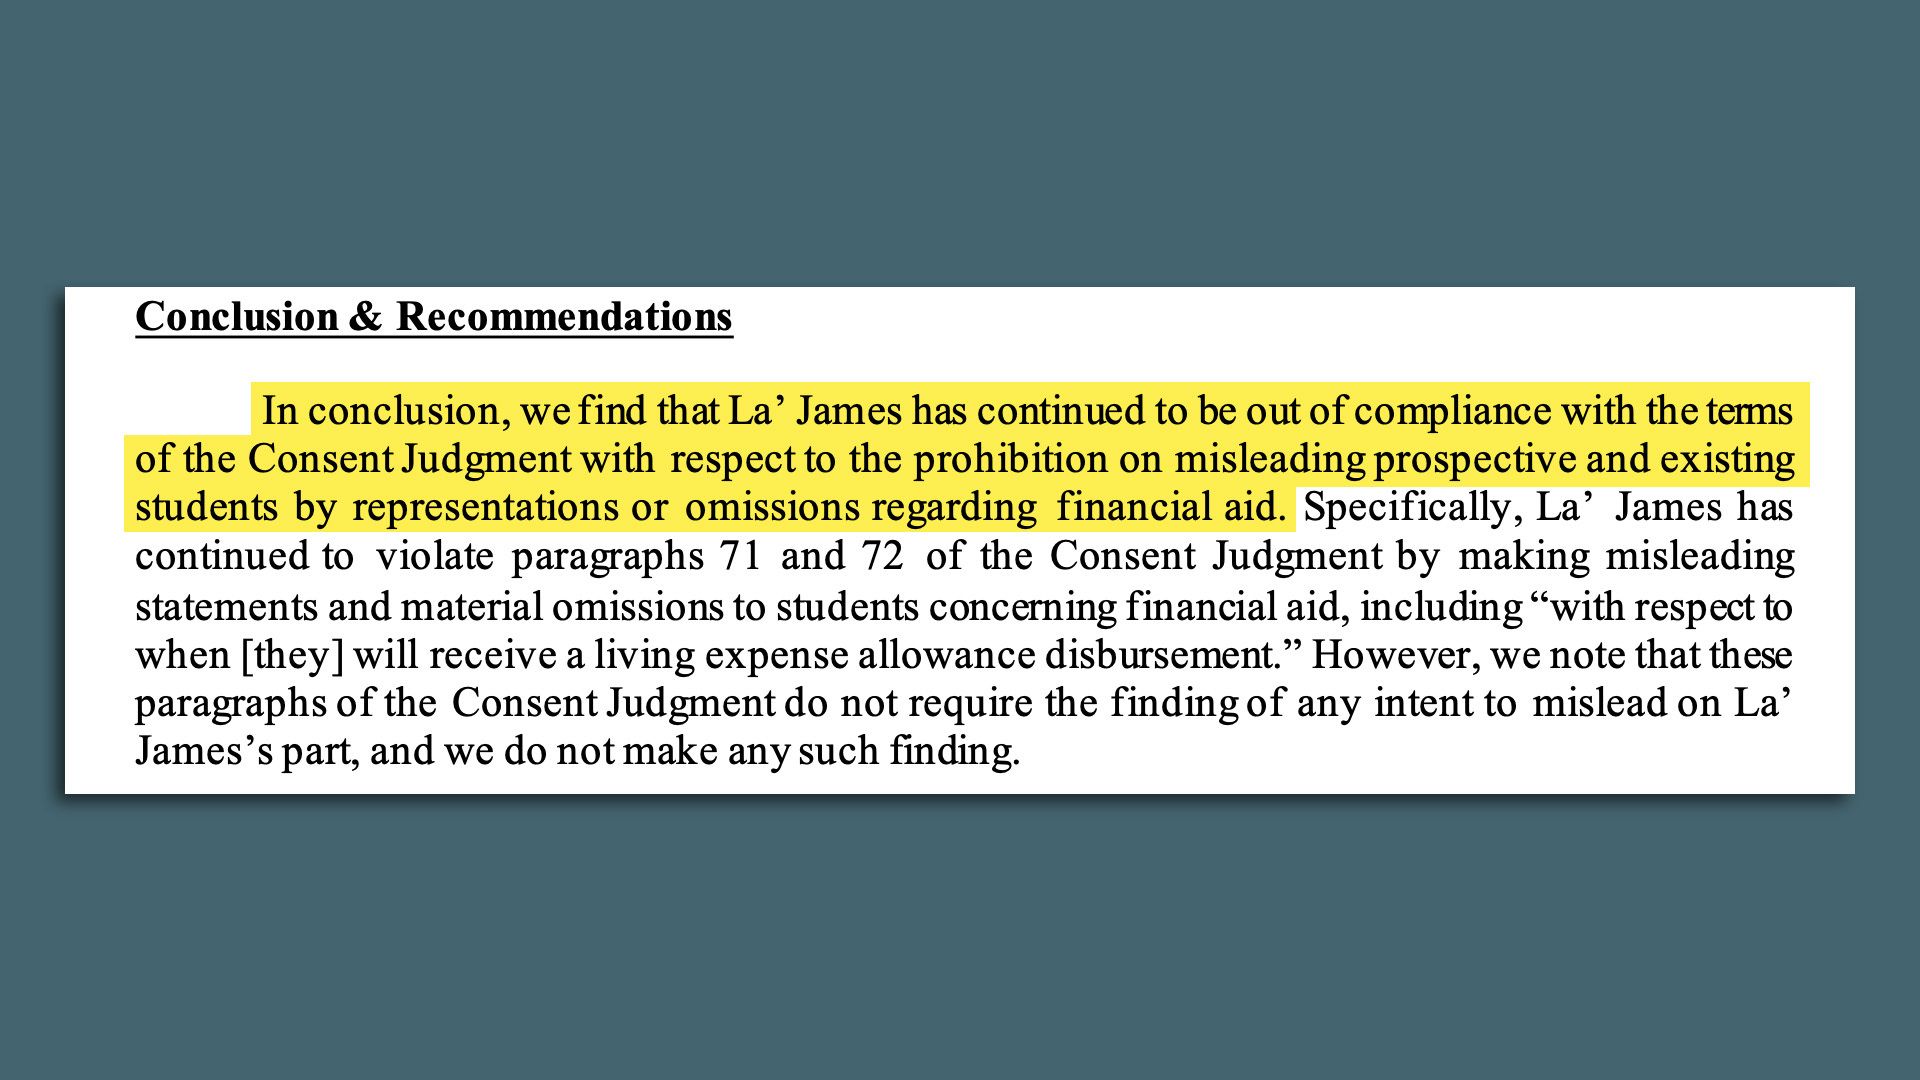 A photo highlighting conclusions about La' James by the Iowa Attorney General's office.